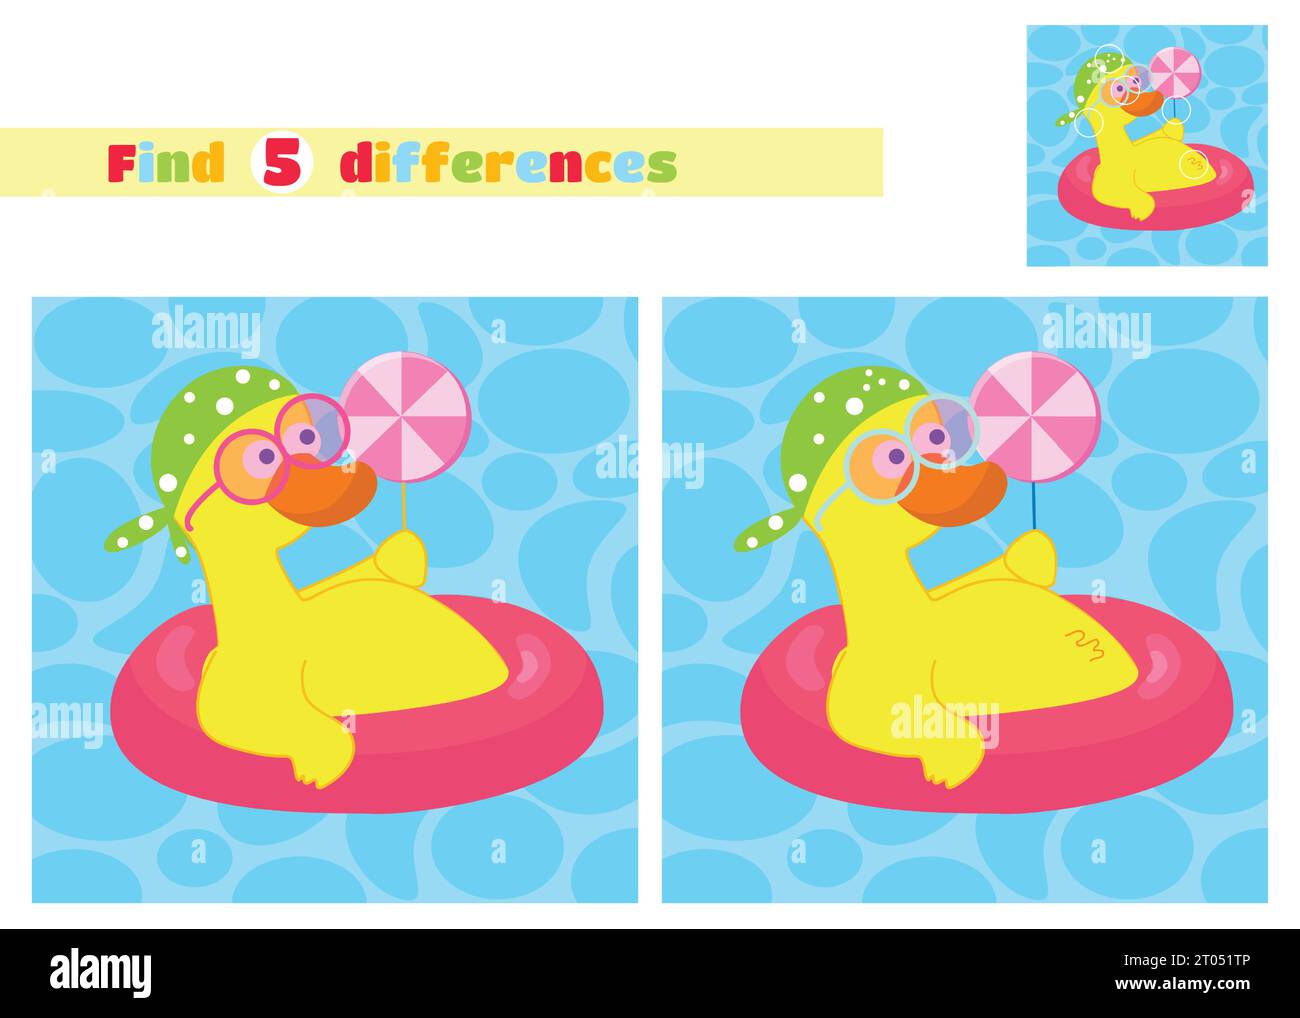 Find the differences. A duck in a handkerchief and glasses floats with a lollipop on an inflatable circle on the water in a cartoon style. Stock Vector